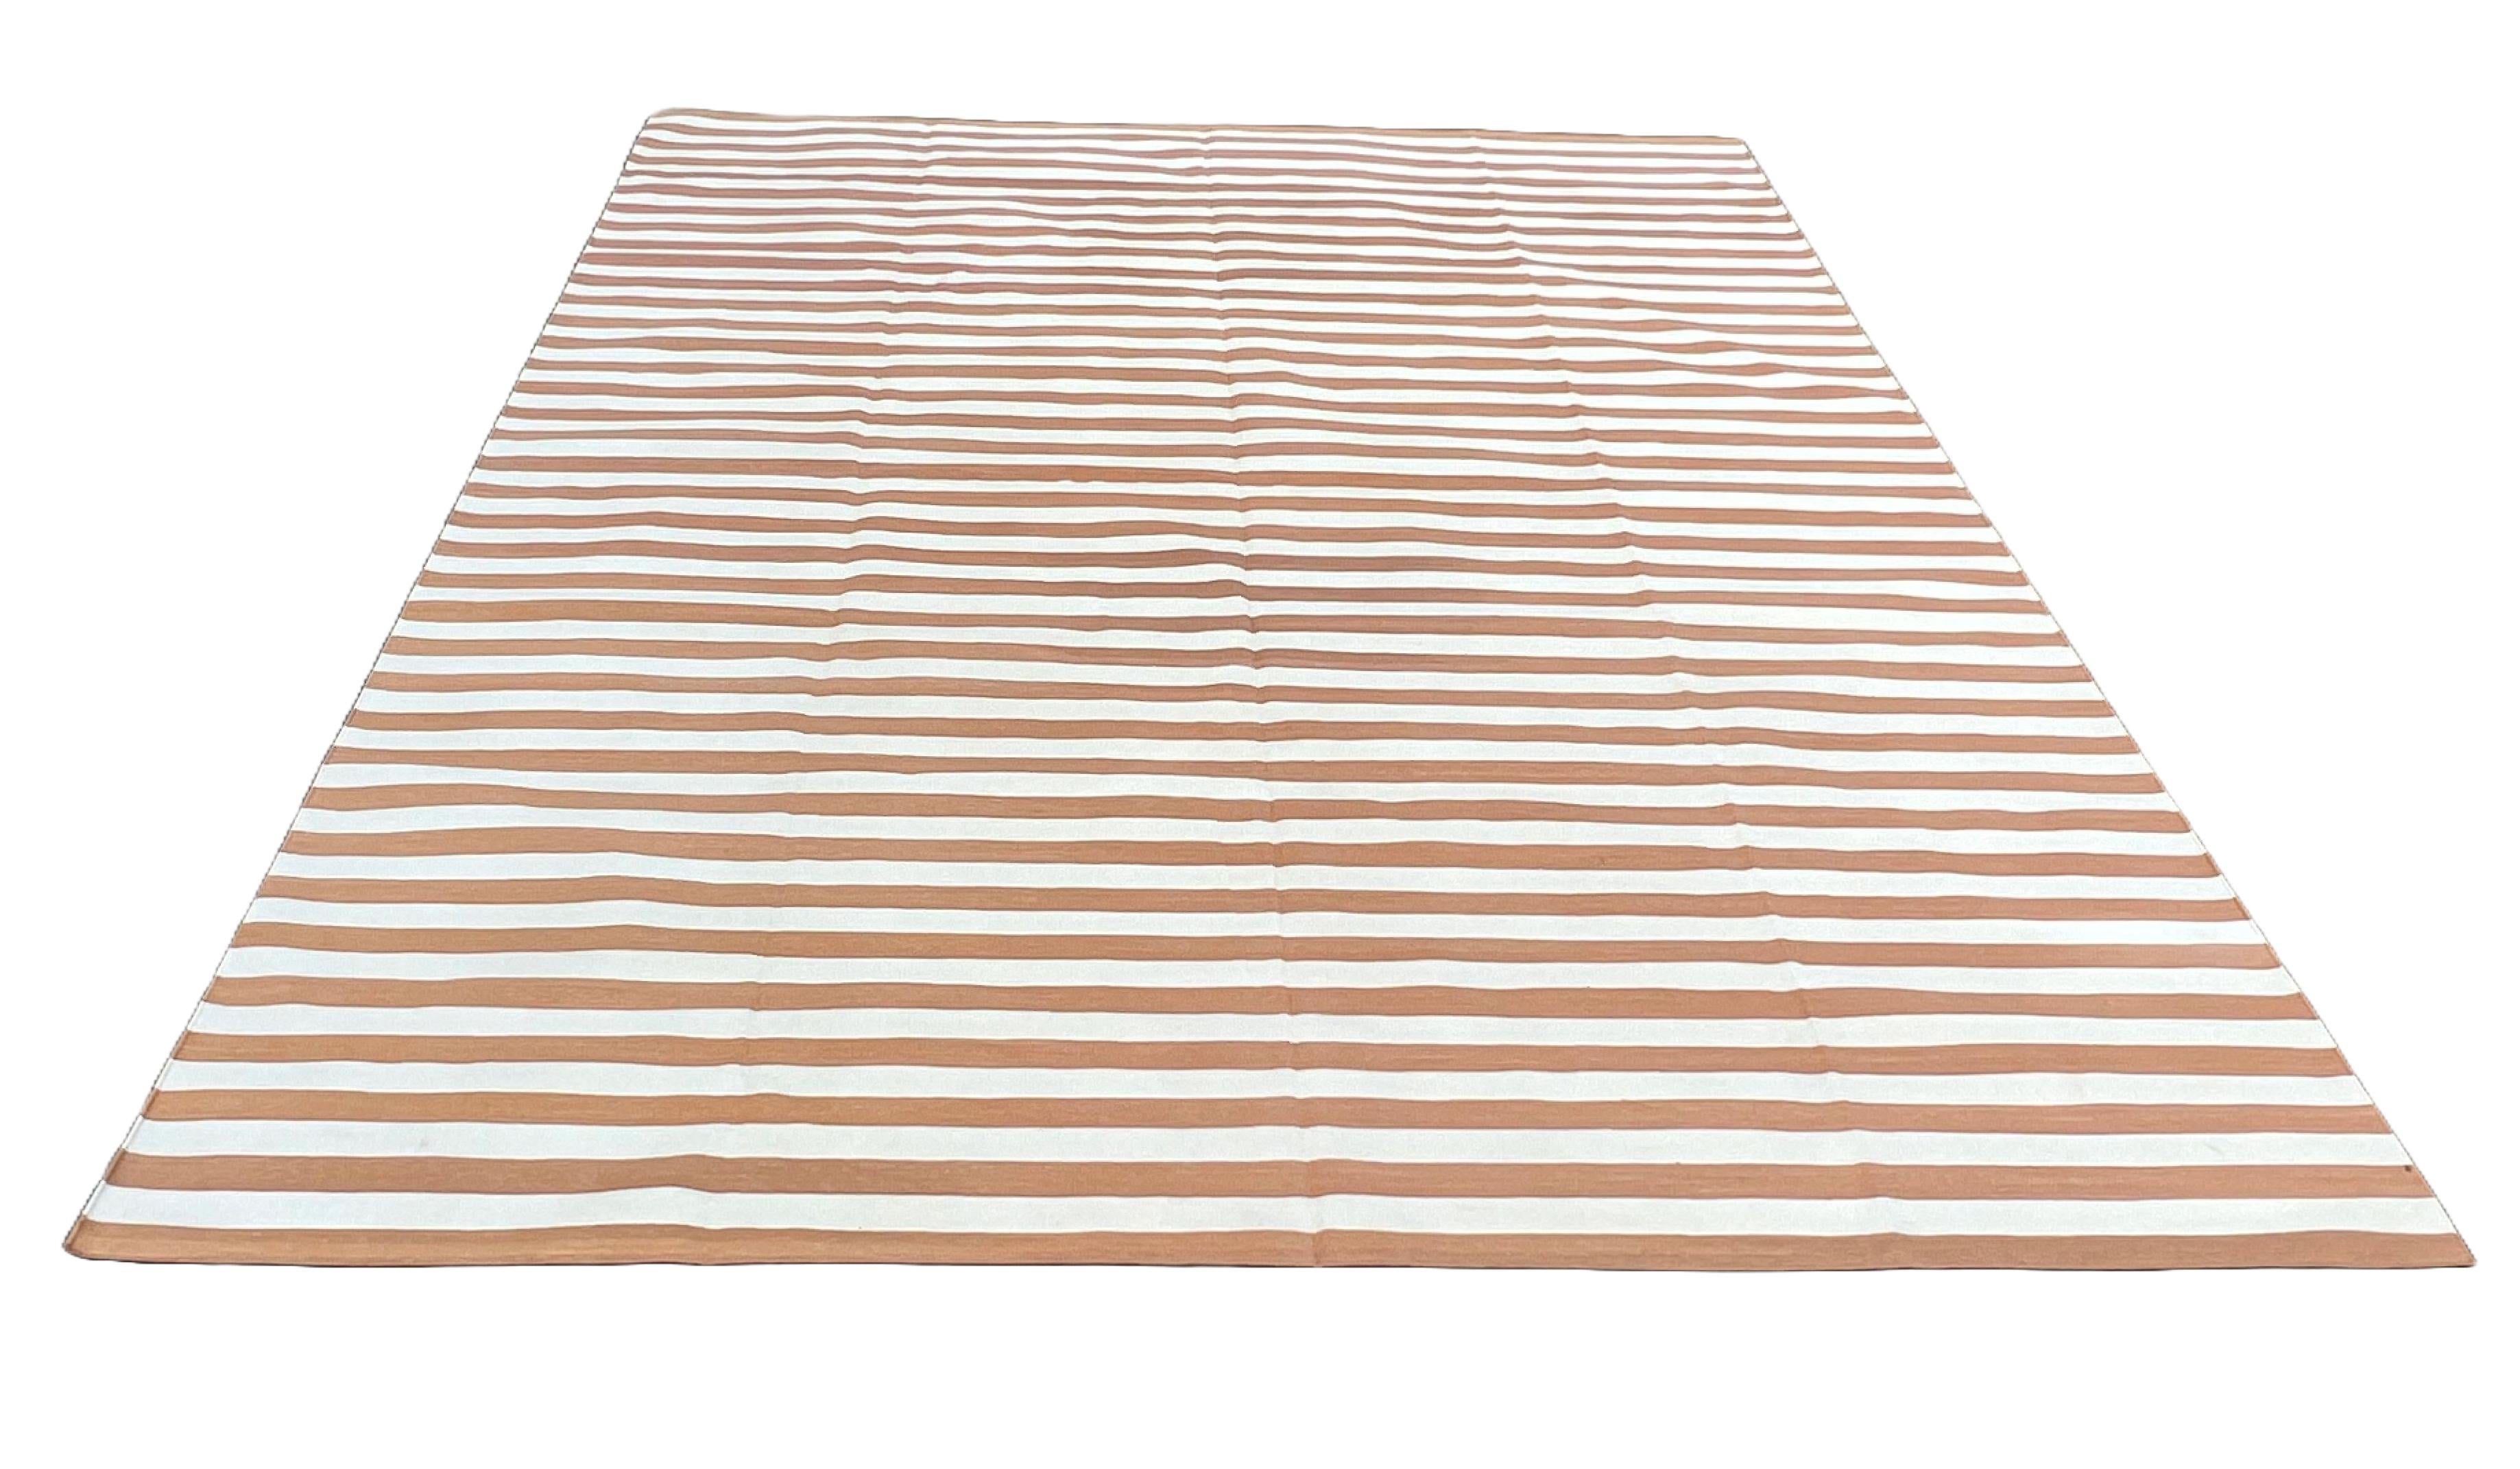 Handmade Cotton Area Flat Weave Rug, 9x12 Tan And White Striped Indian Dhurrie In New Condition For Sale In Jaipur, IN